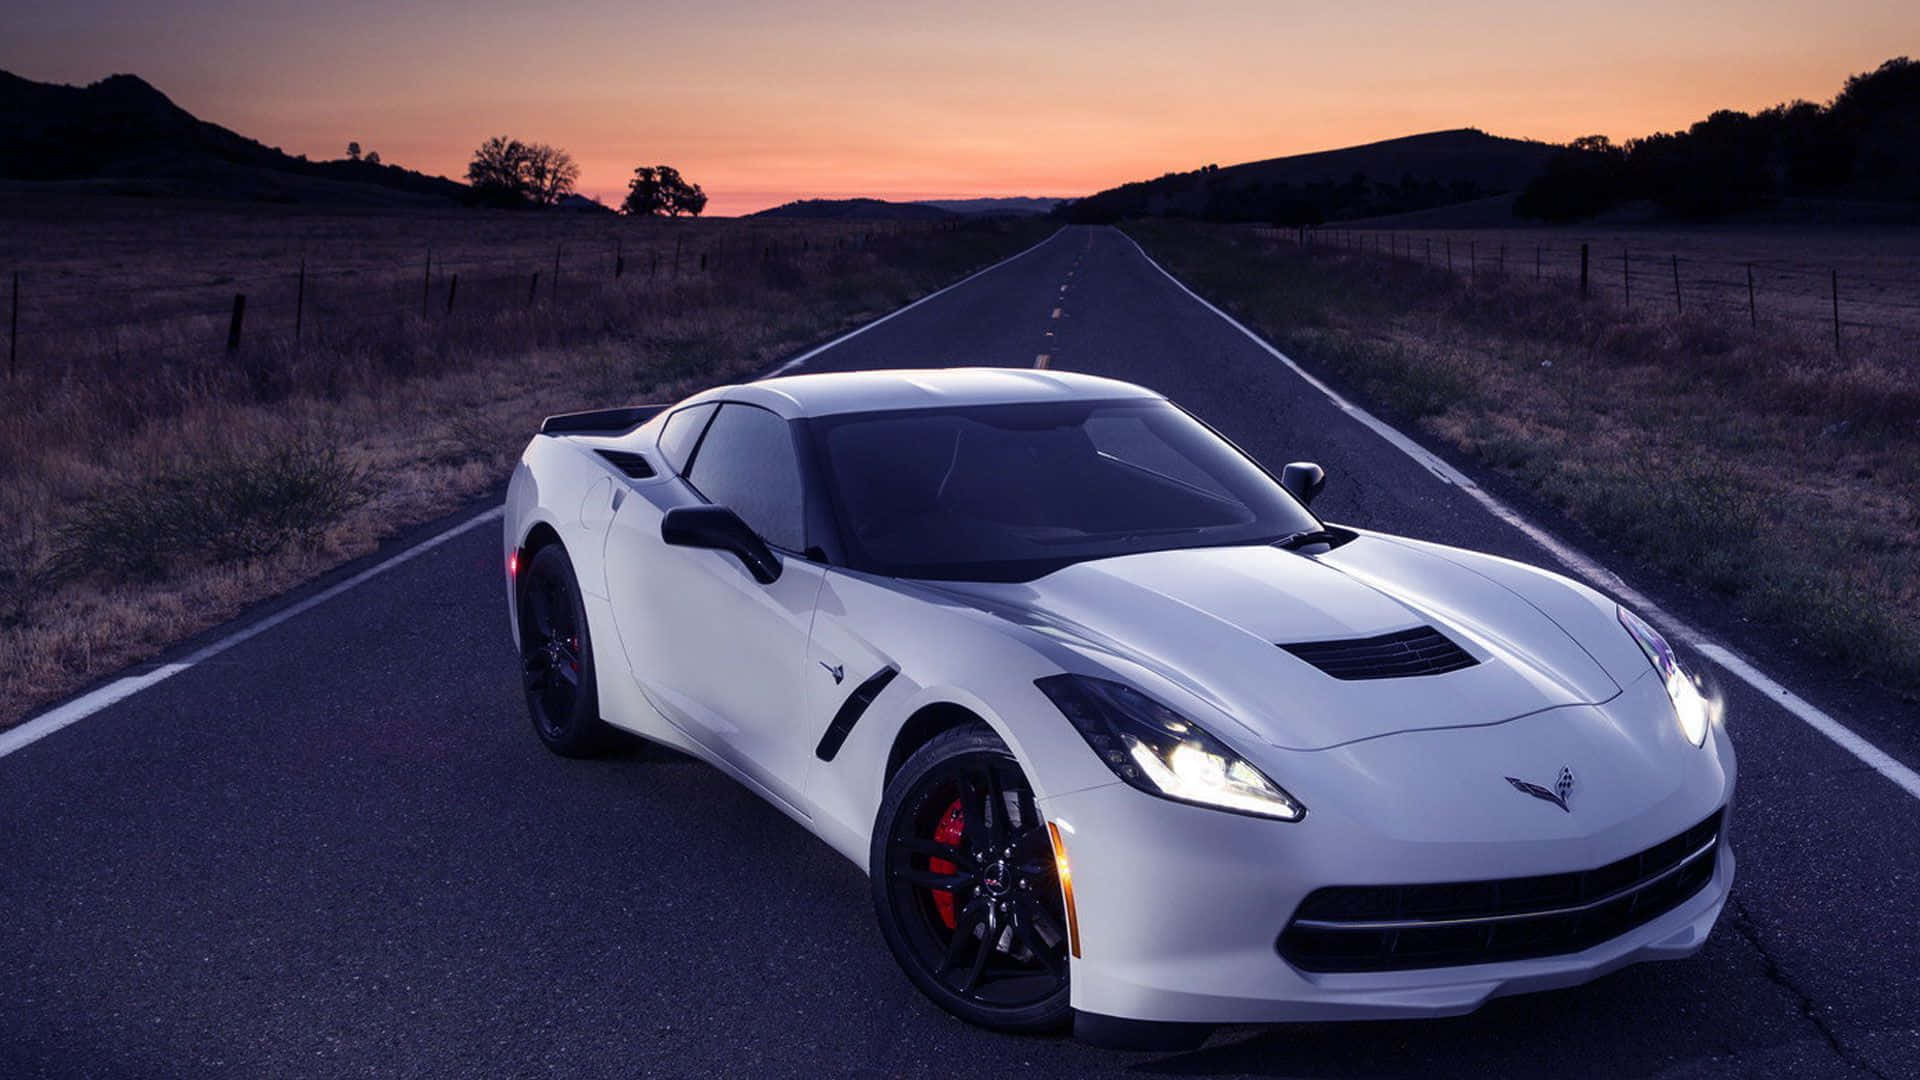 Speed and power define the American classic, the Corvette